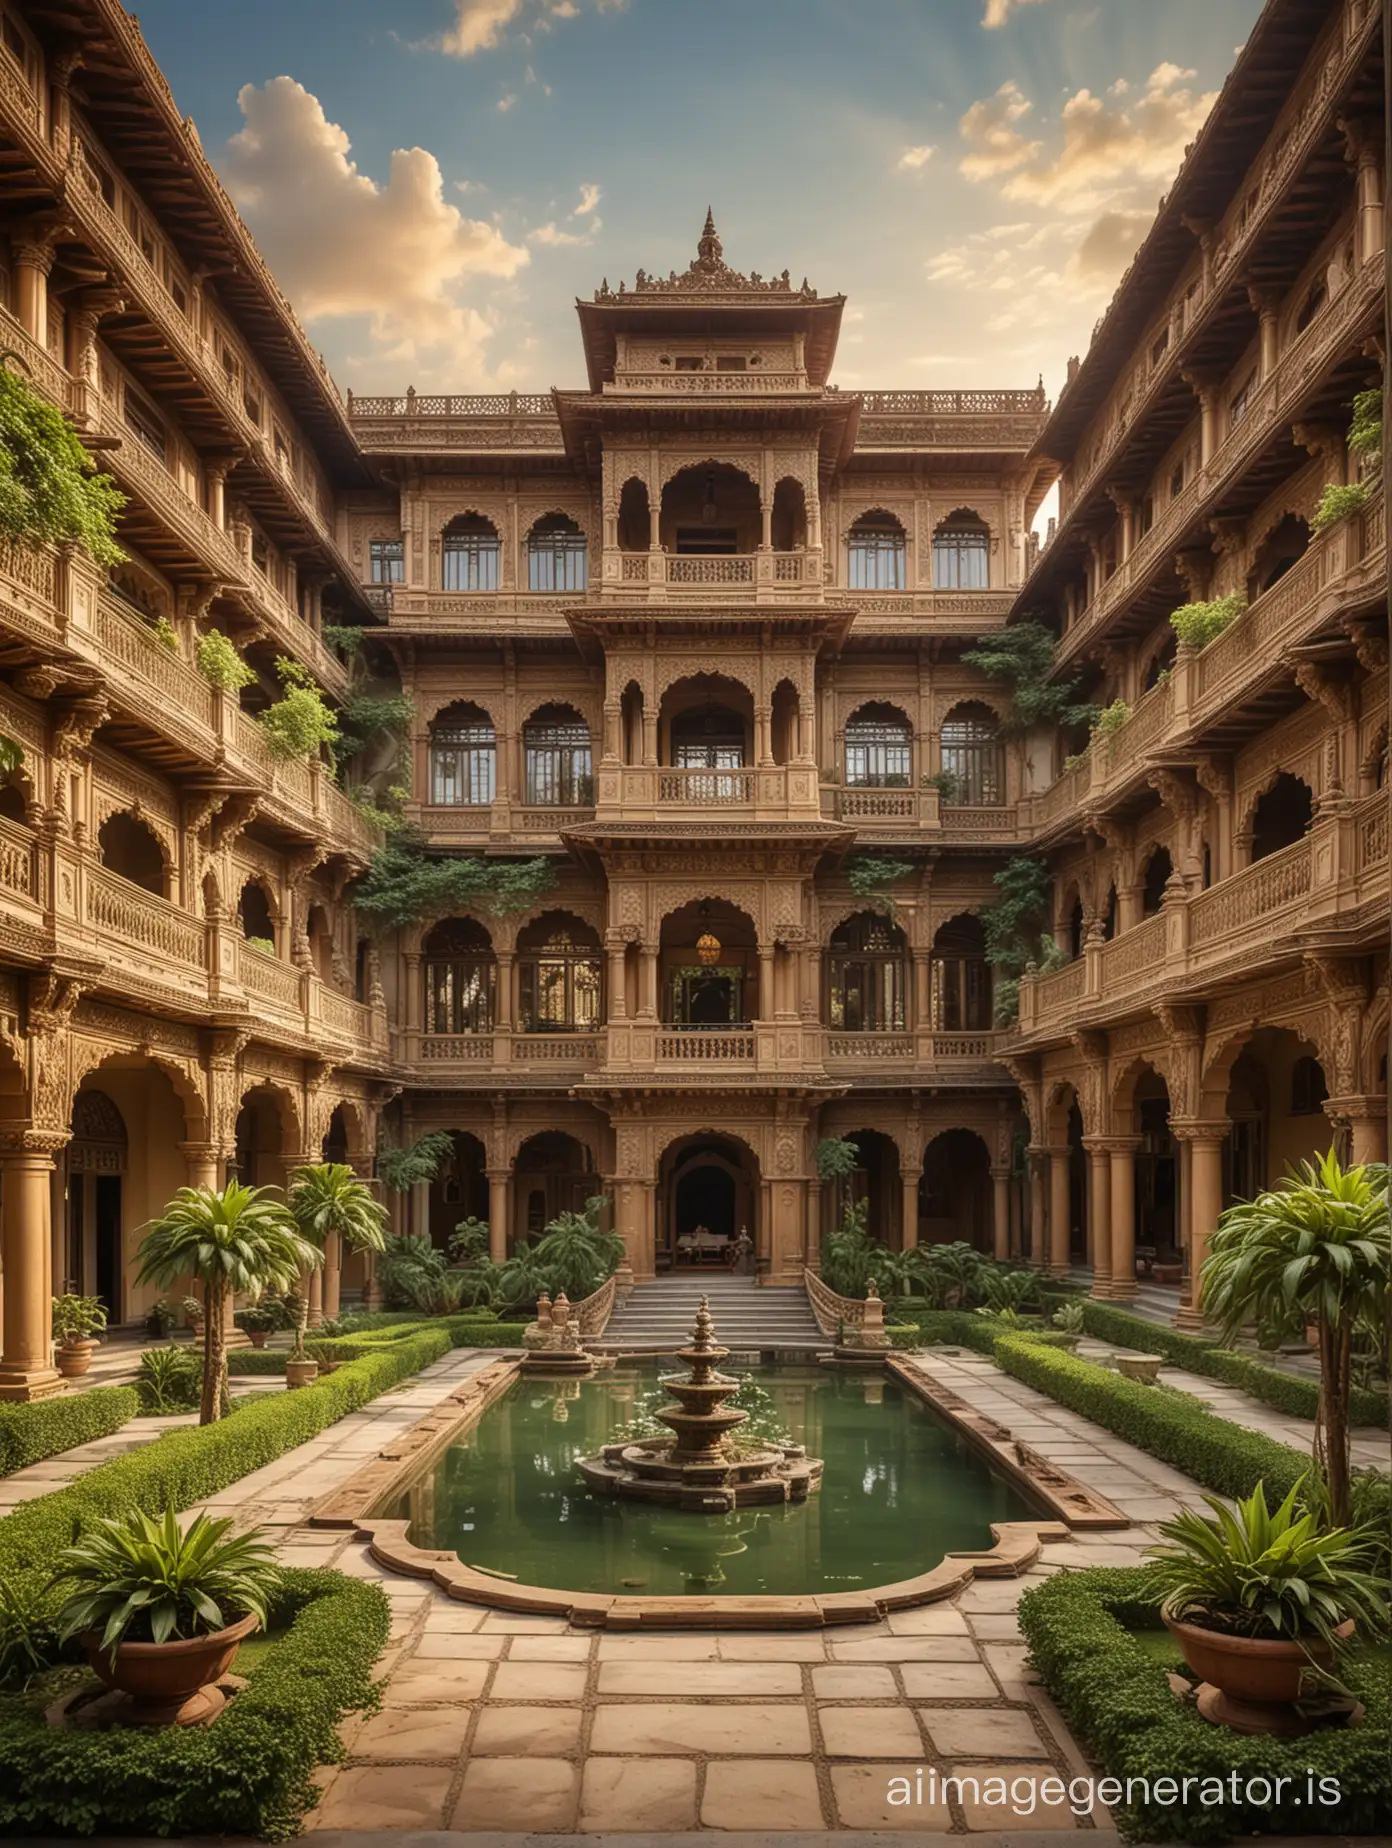 Generate an image of an opulent palace with lush gardens and ornate architecture, showcasing Siddhartha's luxurious lifestyle